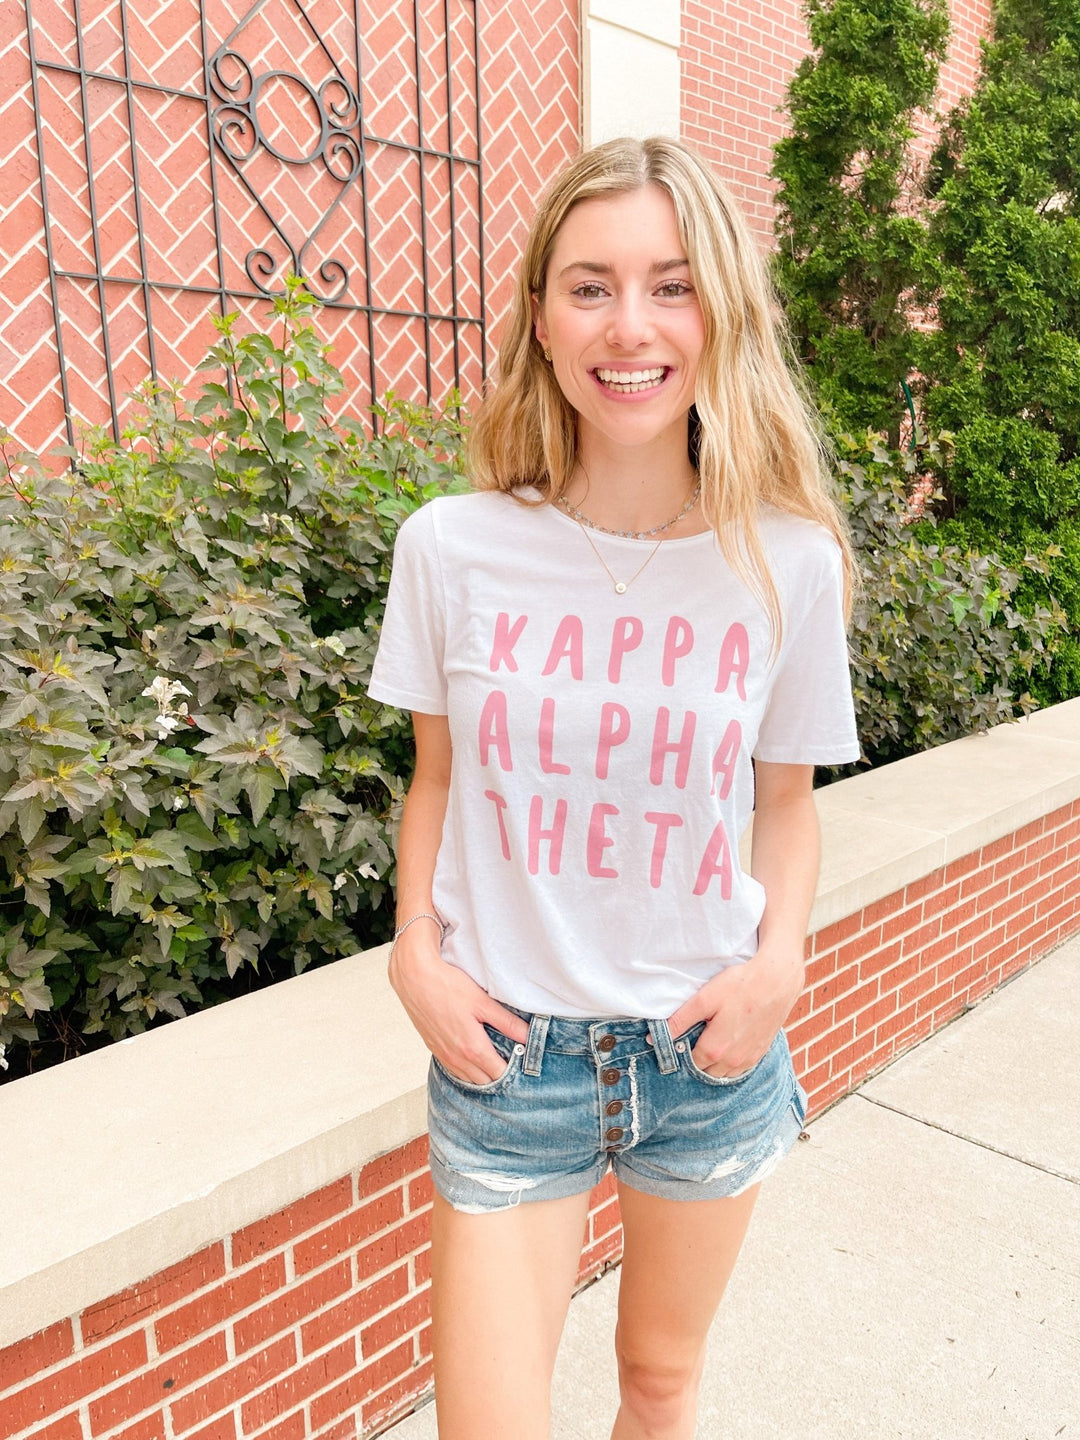 10 Things I Wish I Knew Before Going Through Sorority Recruitment - Kite and Crest